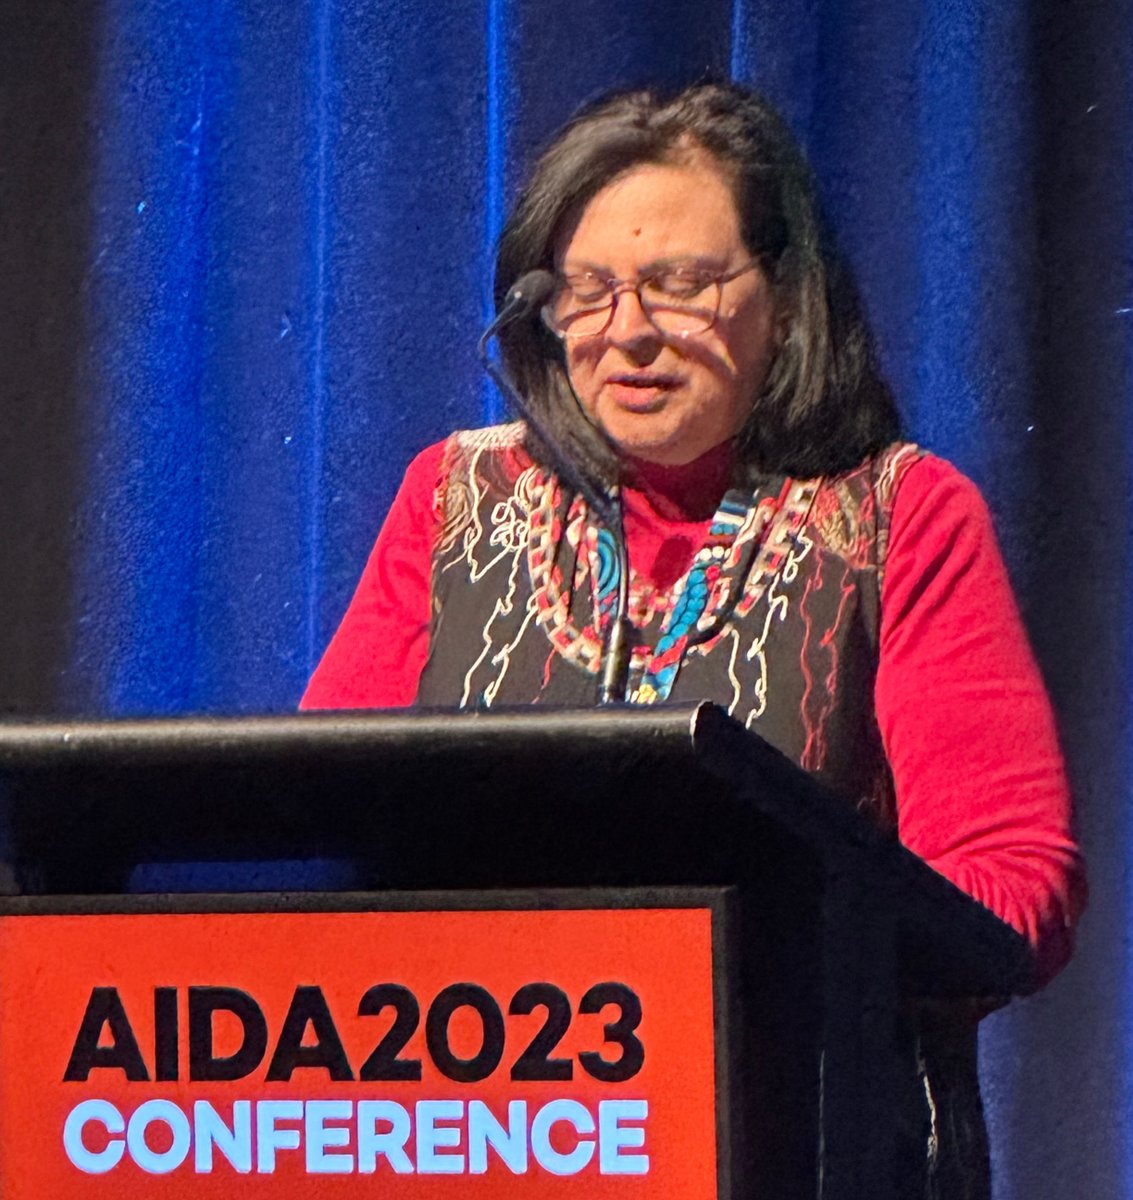 RACMA is proud to be part of @AIDAAustralia 2023 Conference 'Our Sovereign Place in Health'. AIDA President Dr Simone Raye implored attendees to fill their cultural cup, network and share experiences. #leadership #health #AIDAconference23